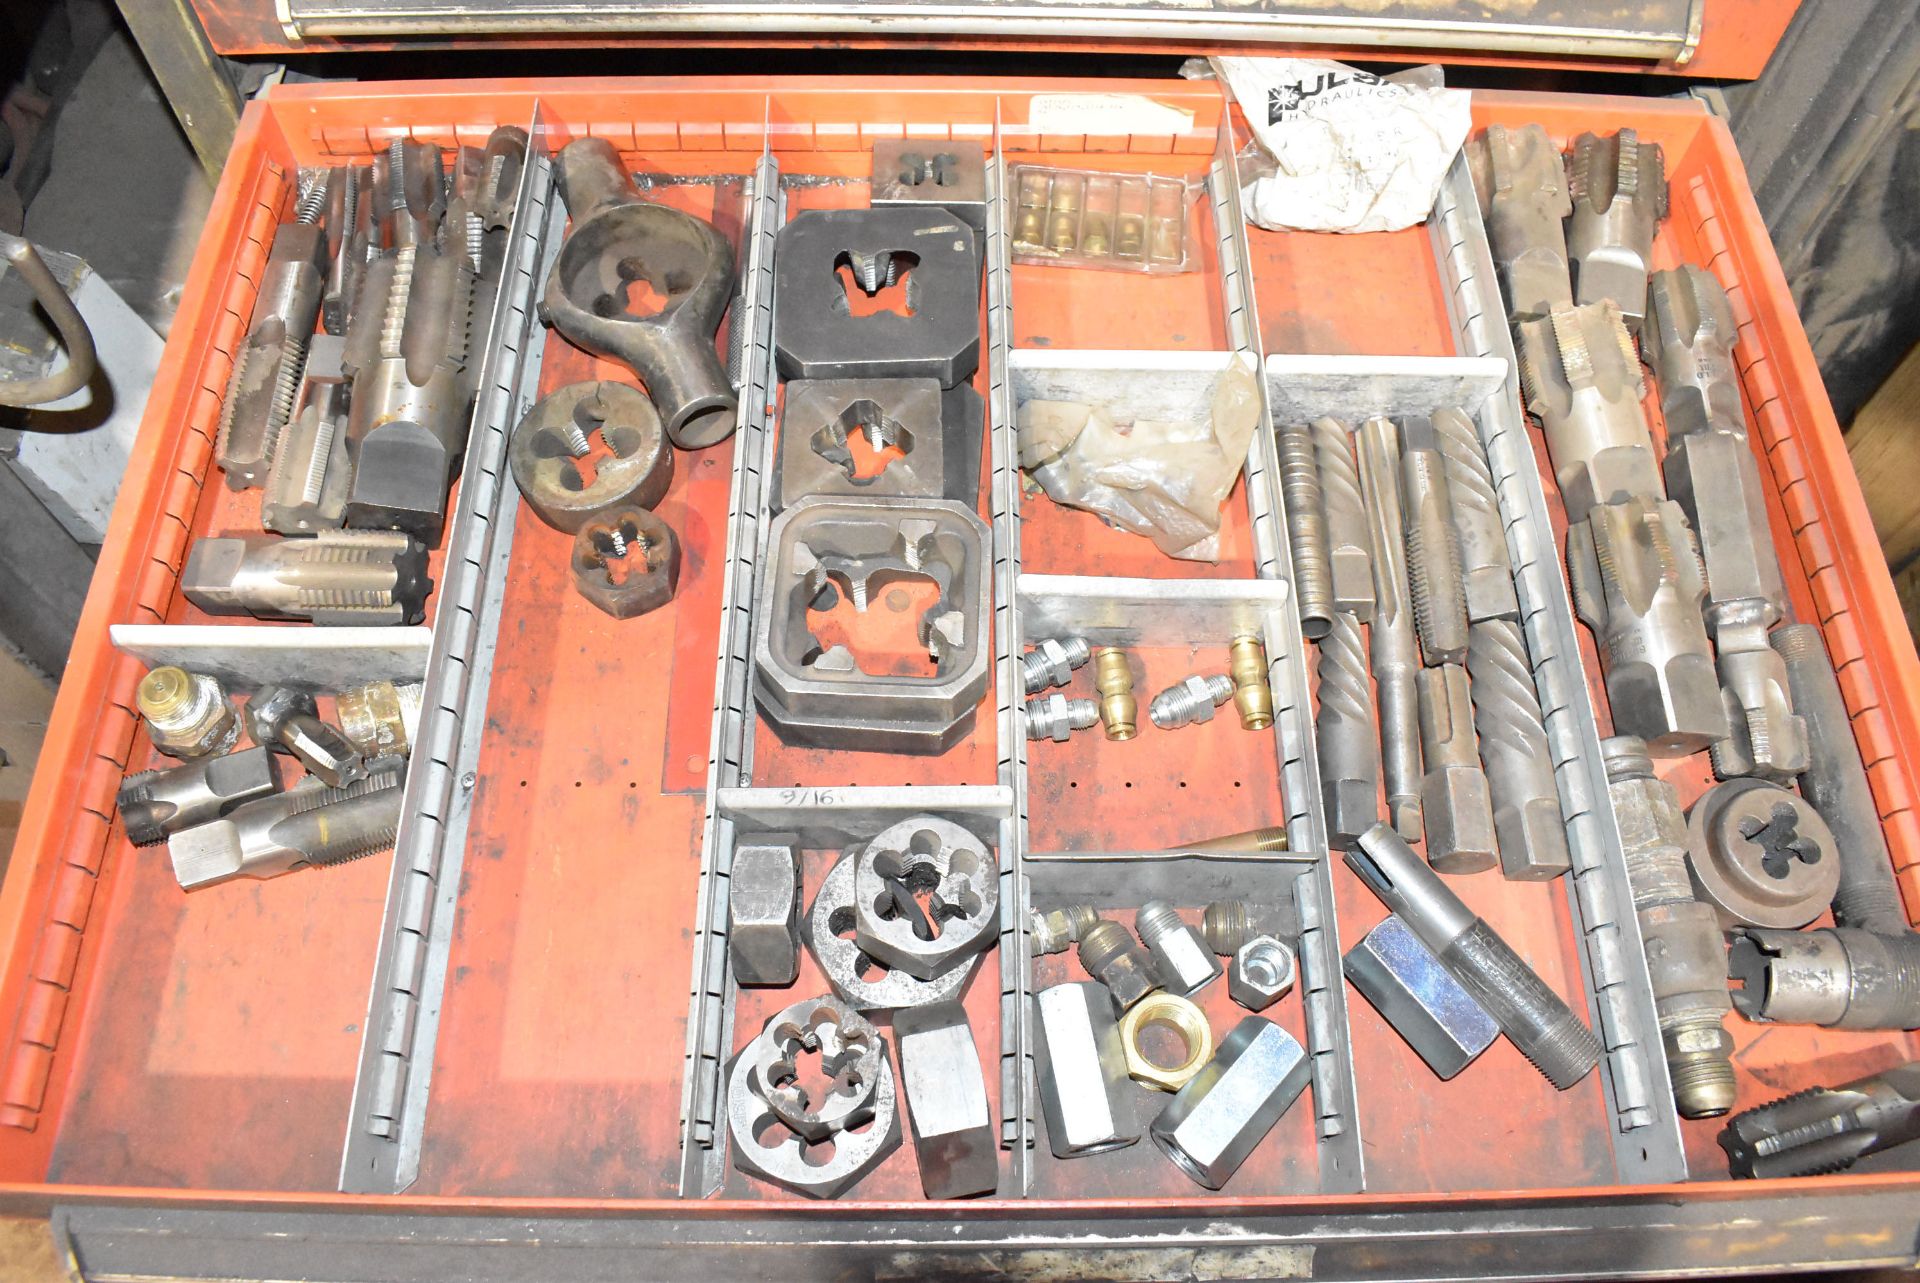 LOT/ CONTENTS OF TOOL CABINET - INCLUDING FITTINGS, FITTING CLAMPS, SPARE PARTS, TAPS & DIES, - Image 10 of 14